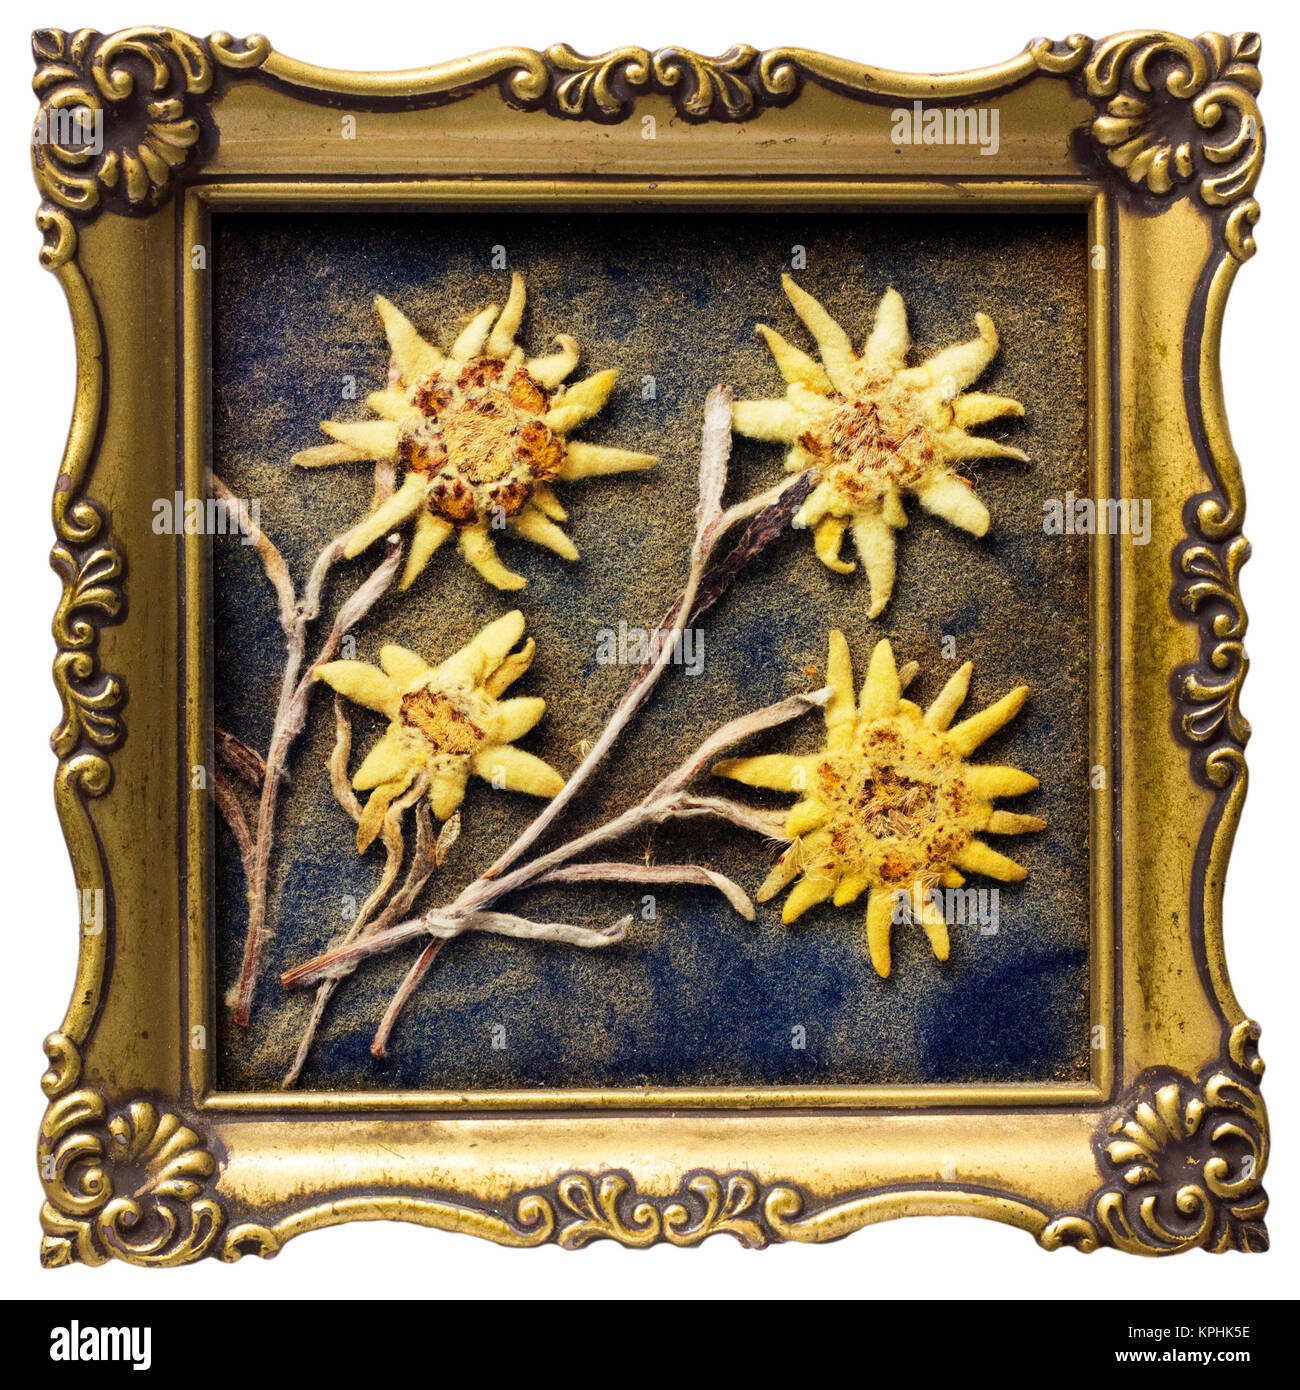 Edelweiss in photo frame Stock Photo